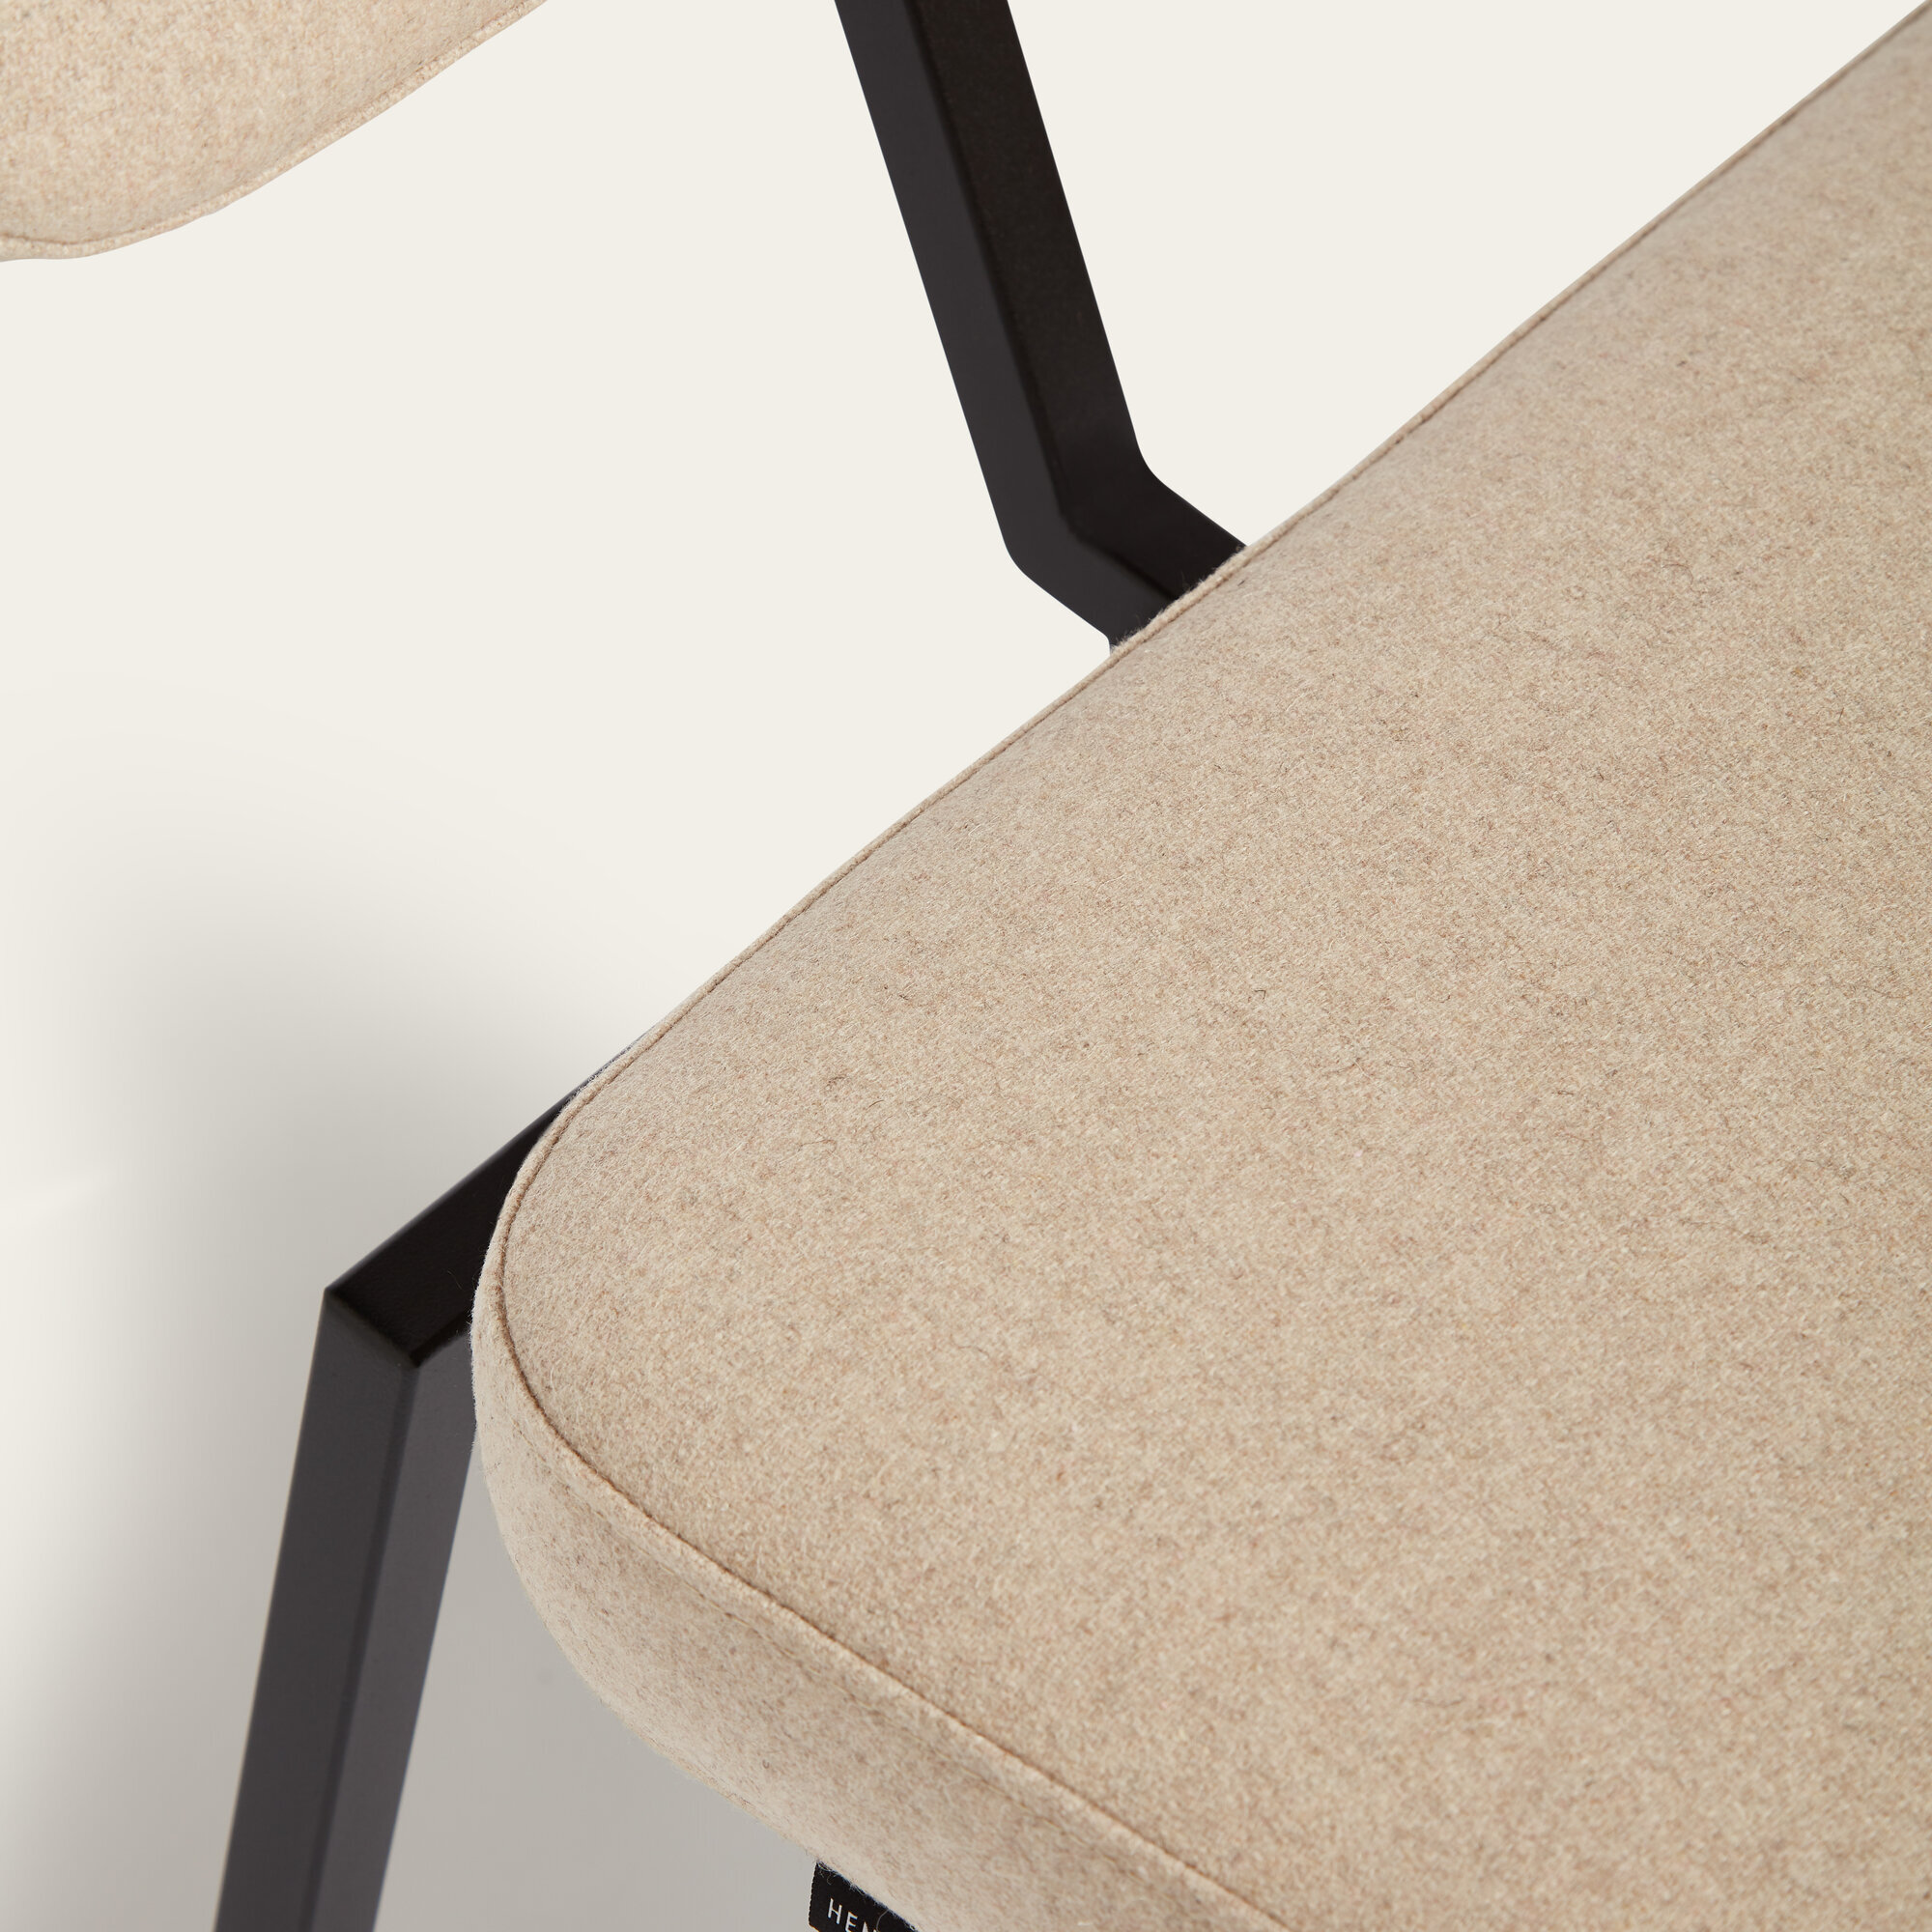 google_dining_chair_title_suffix | Ode Chair without armrest facet shitake124 | Studio HENK| 